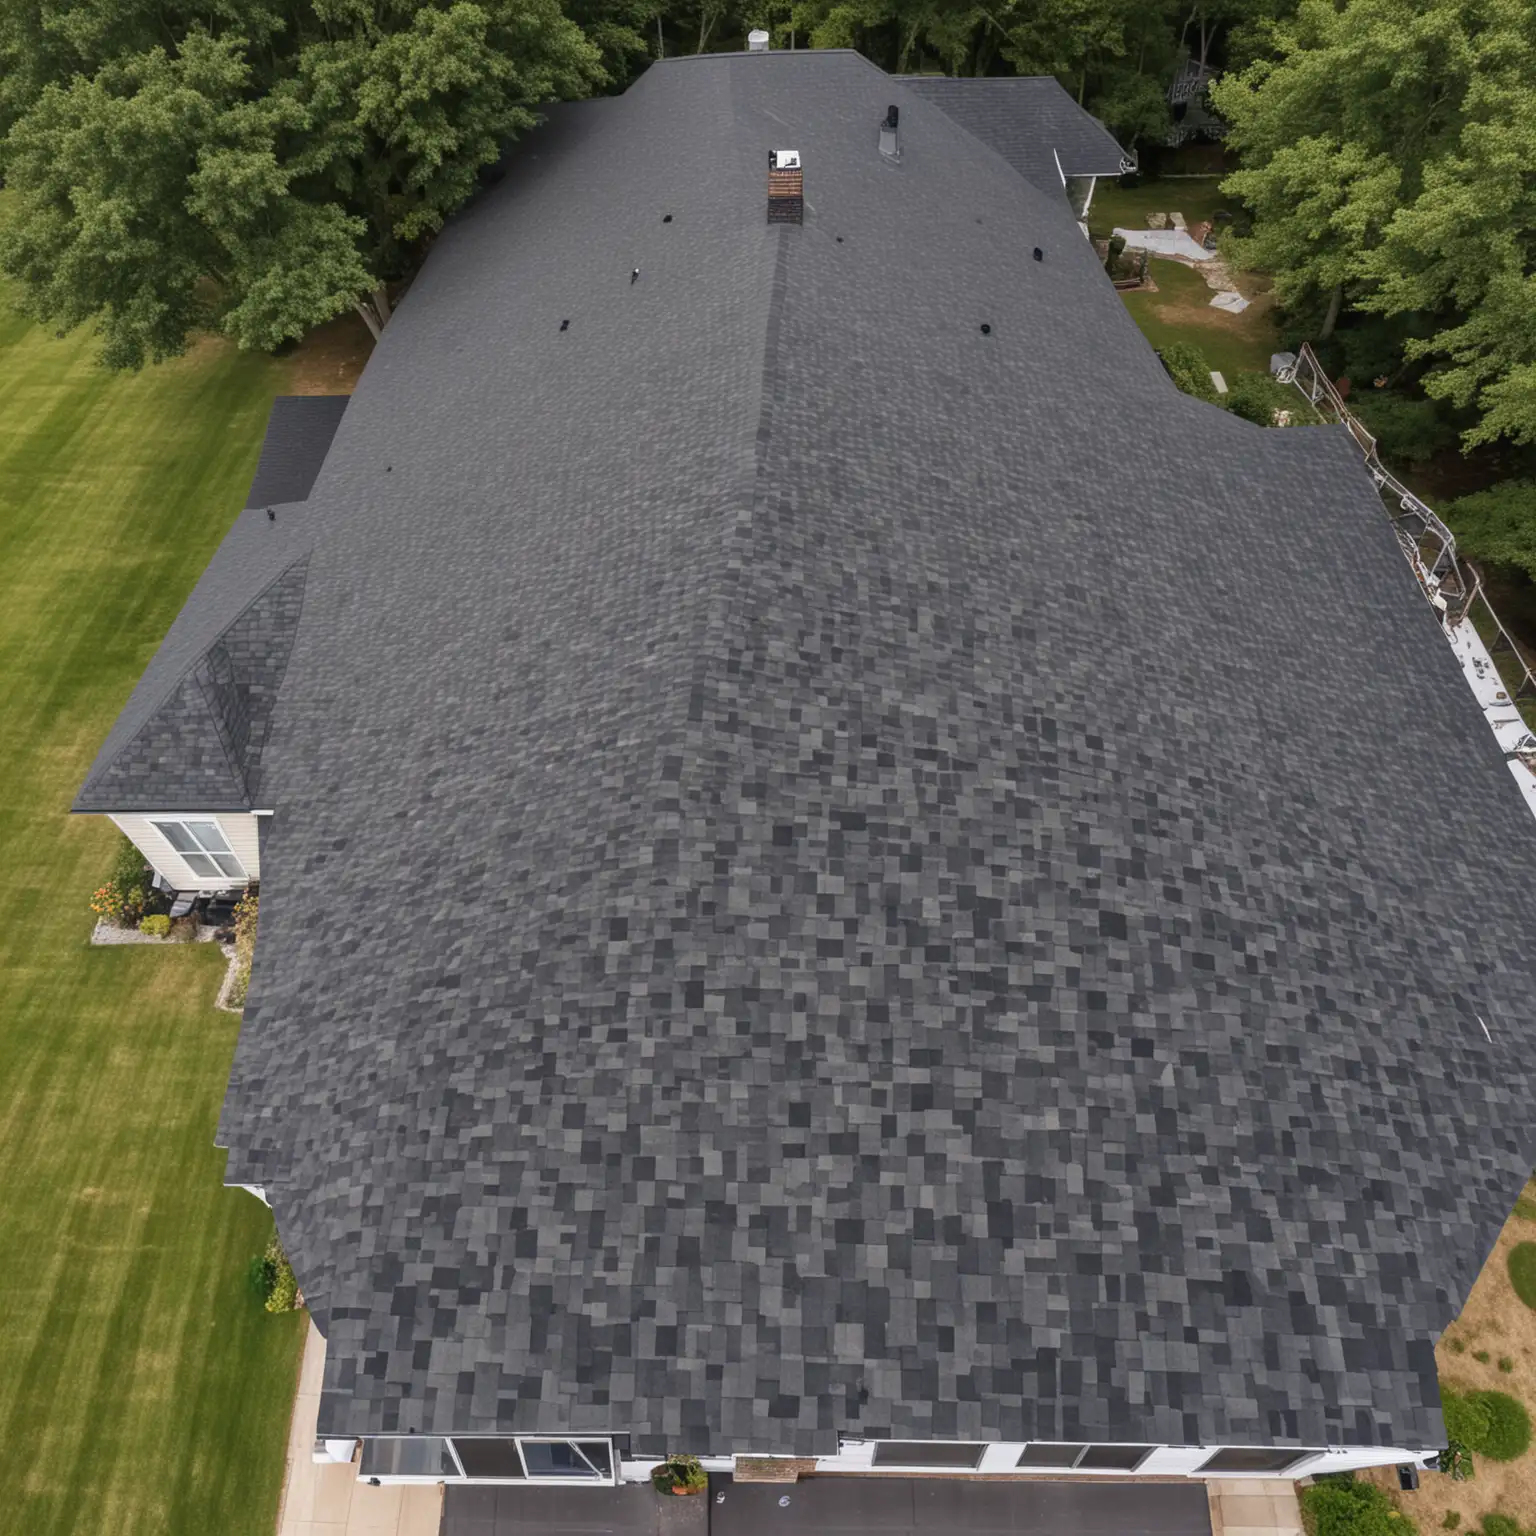 Drone footage shot of a newly installed shingle roof, shot from above so you can see the whole house. The house is approximately 6500 sq ft